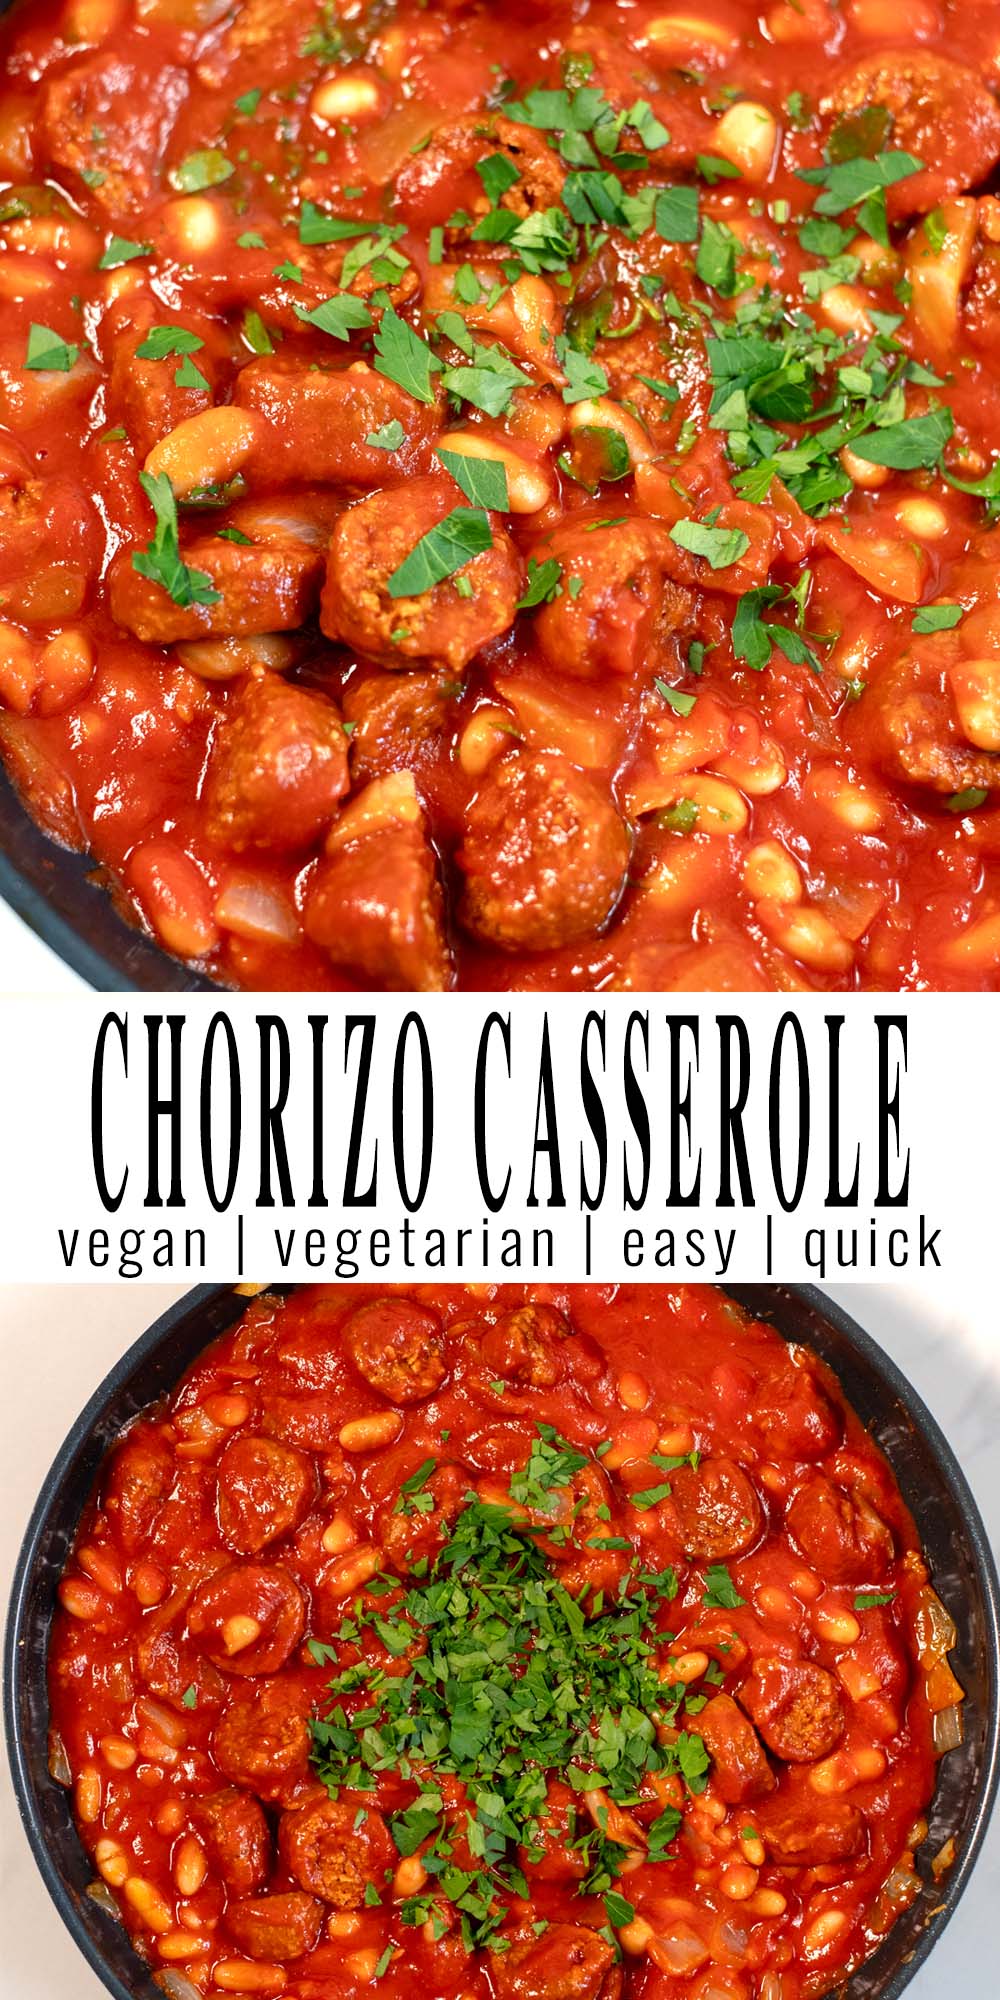 Collage of two photos showing Chorizo Casserole, with recipe title text.